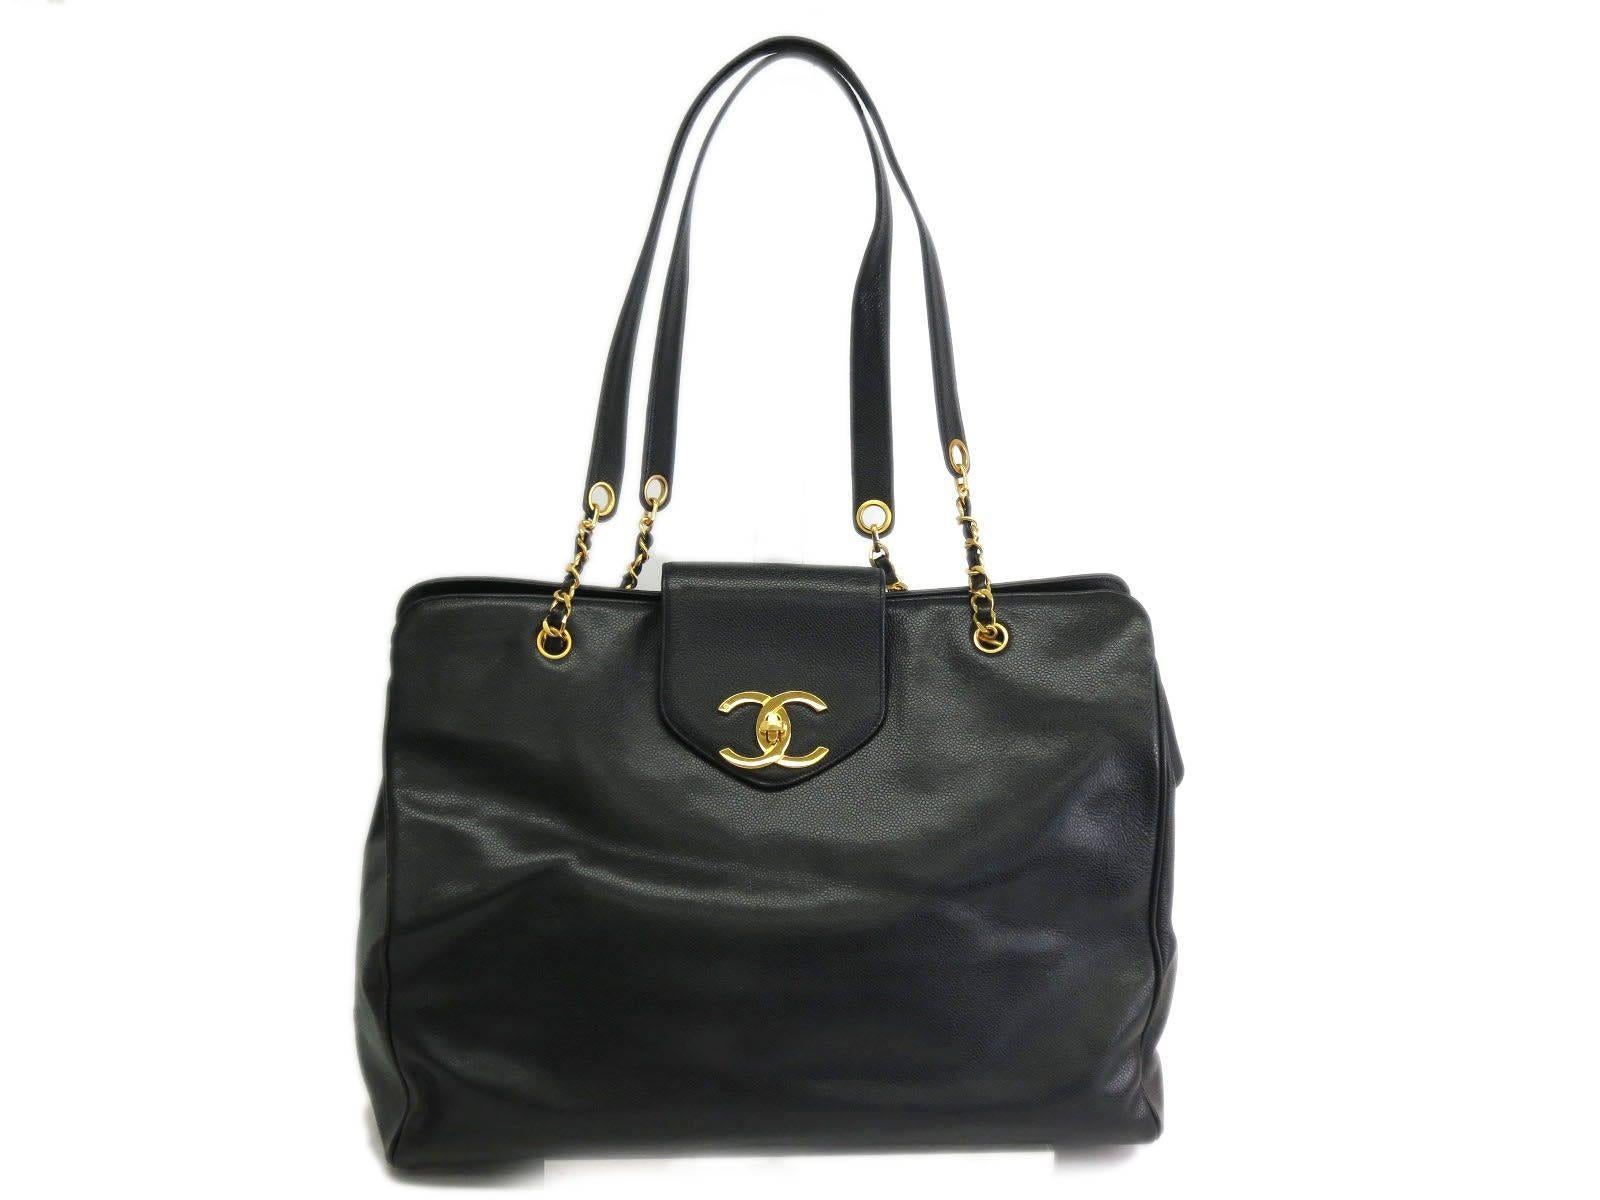 CURATOR'S NOTES

YOWZA!  LIMITED TIME PRICE REDUCTION!

The mother of all Chanel bags! Chanel caviar leather oversized weekend shoulder bag with gold hardware.

Caviar leather
Gold hardware
Made in Italy
Date code 3649539
Measures 17.7